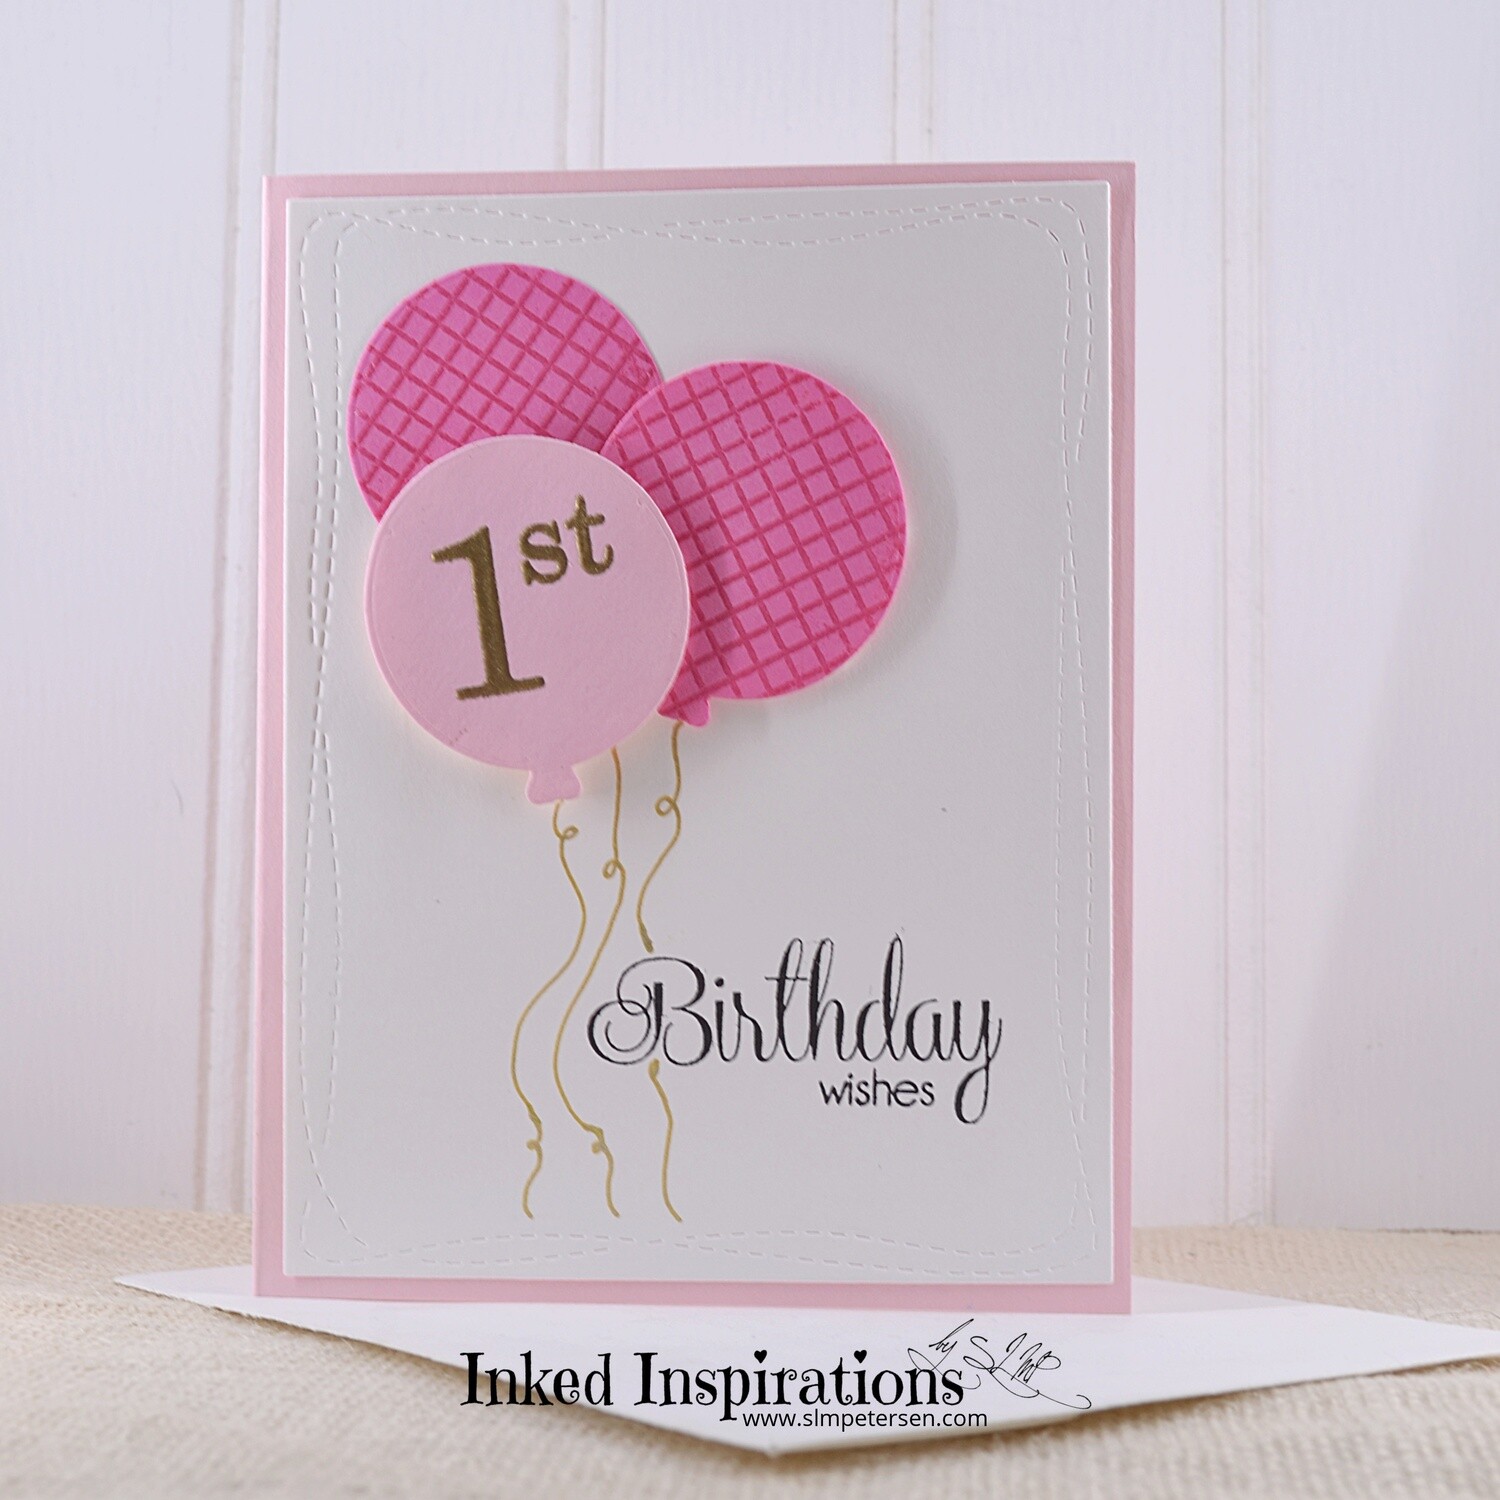 1st Birthday Wishes - Pink Balloons